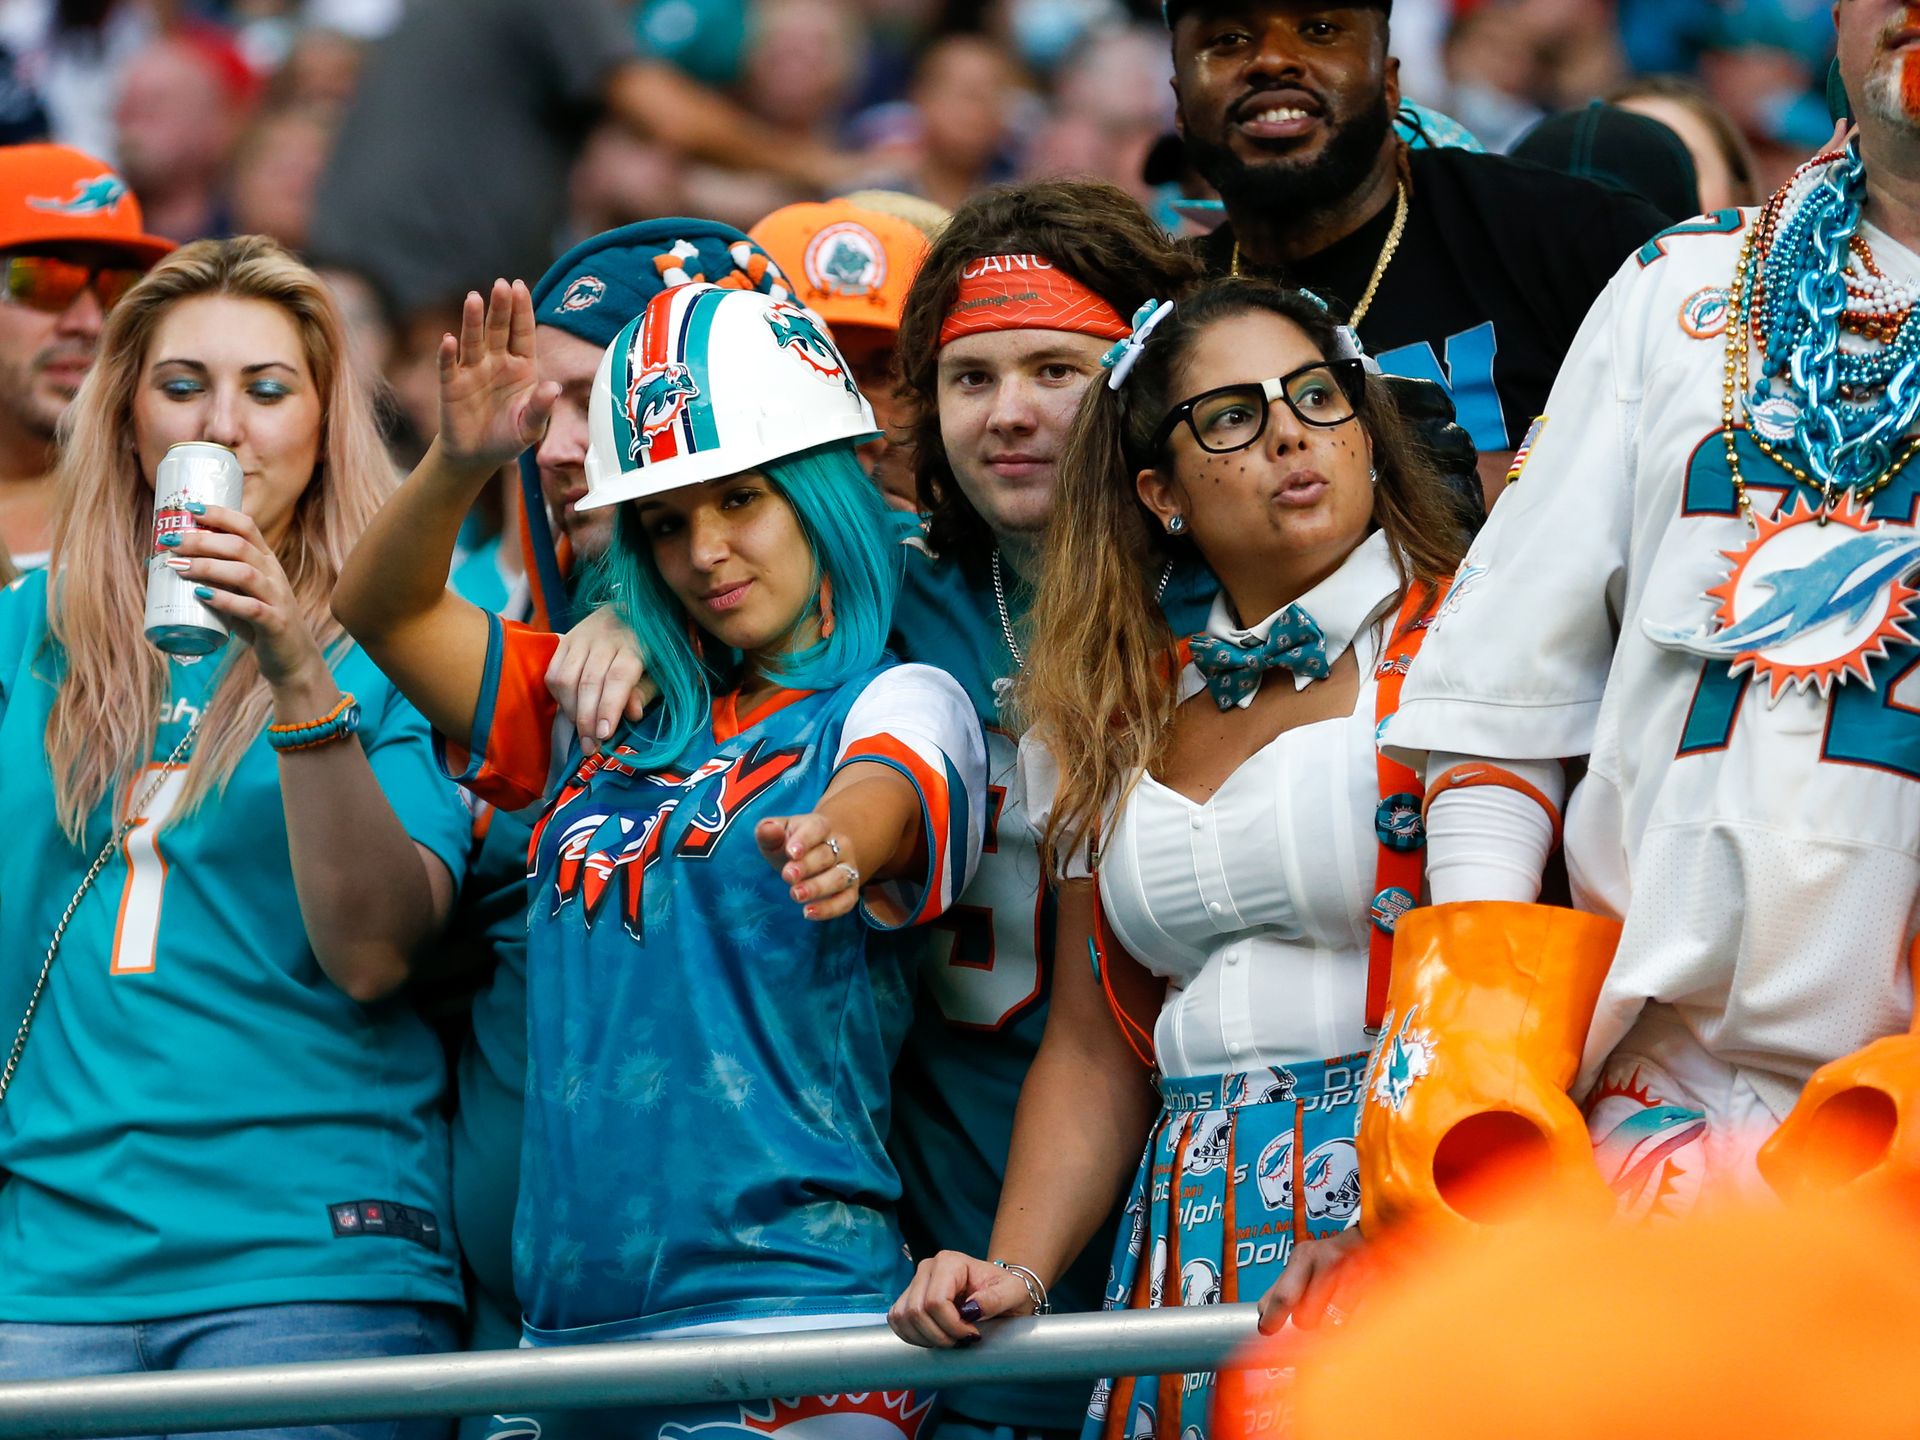 Miami Dolphins game prices rank above NFL average for family outings -  Axios Miami